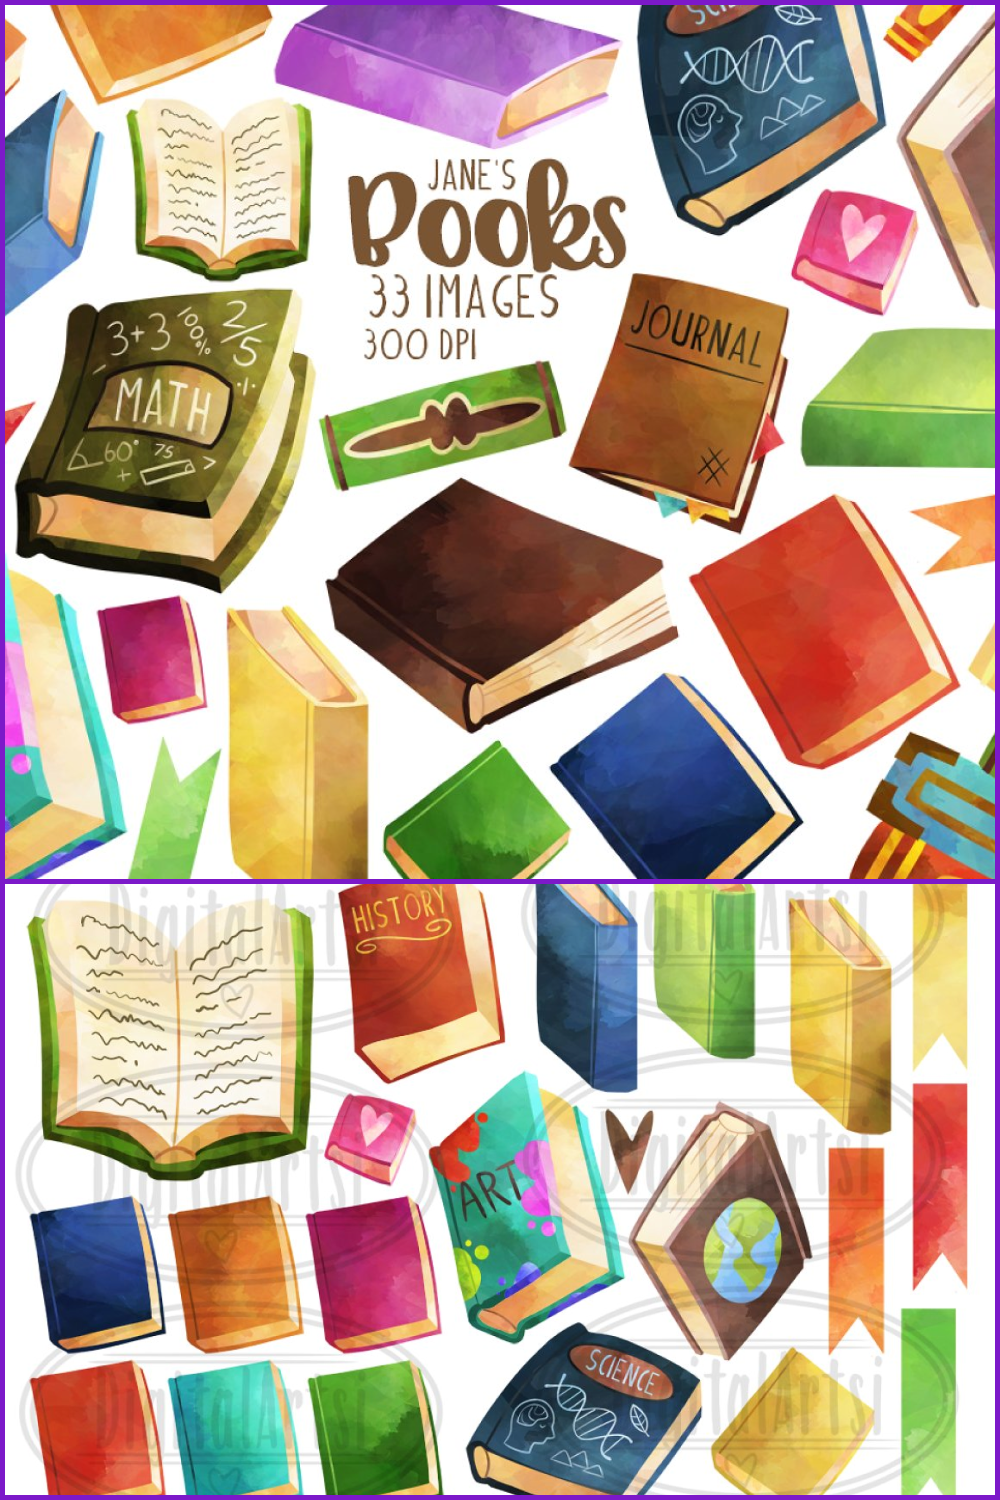 Collage with painted books with colorful covers.